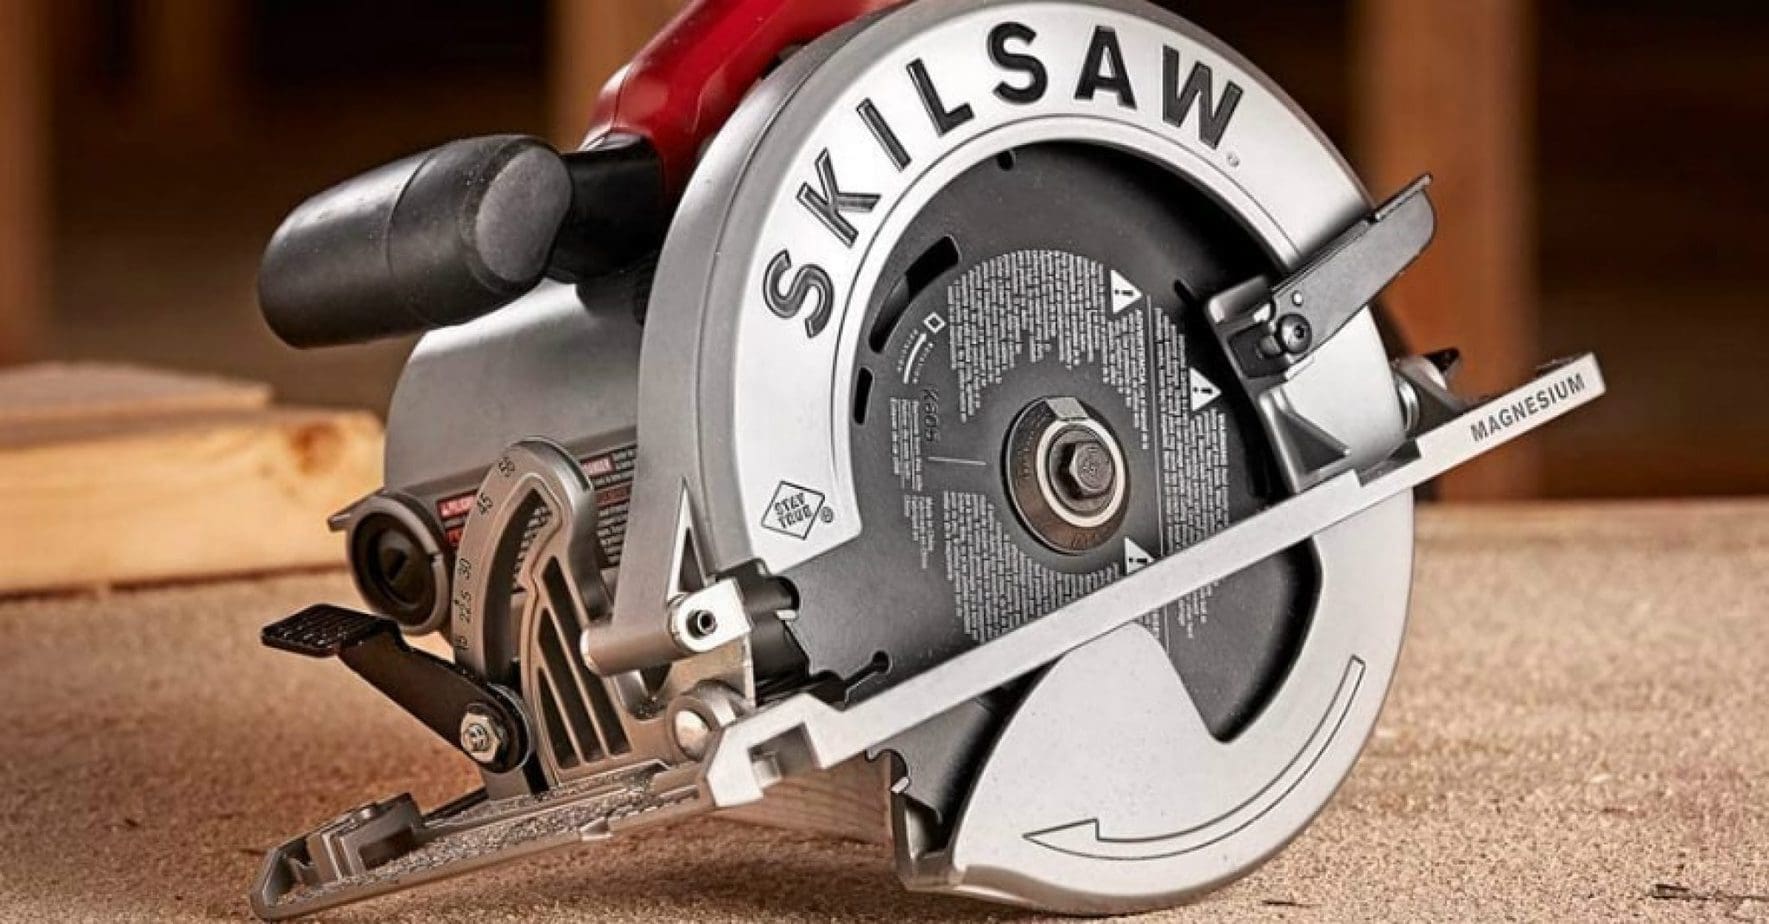 Top 10 Best Corded Circular Saw for Smooth Cuts in 2024